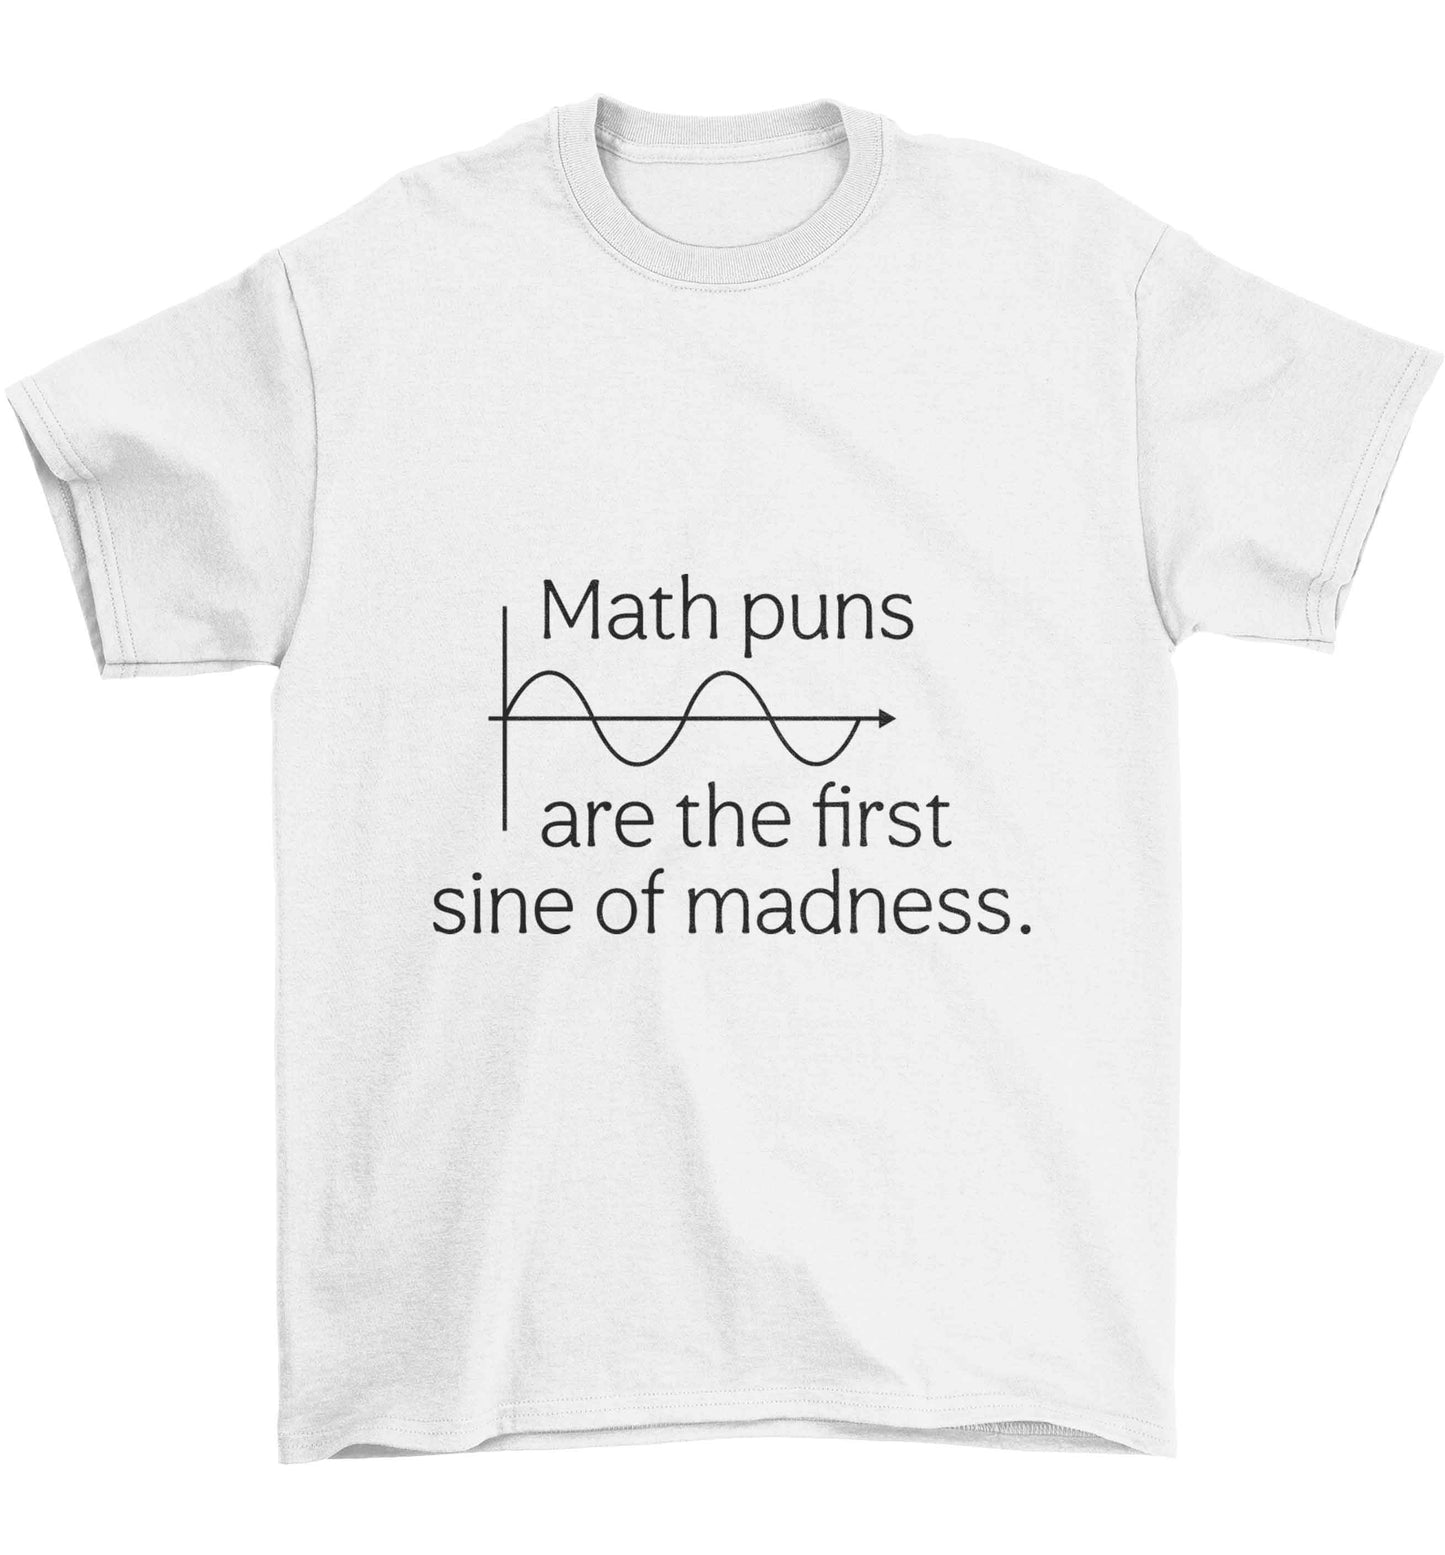 Math puns are the first sine of madness Children's white Tshirt 12-13 Years